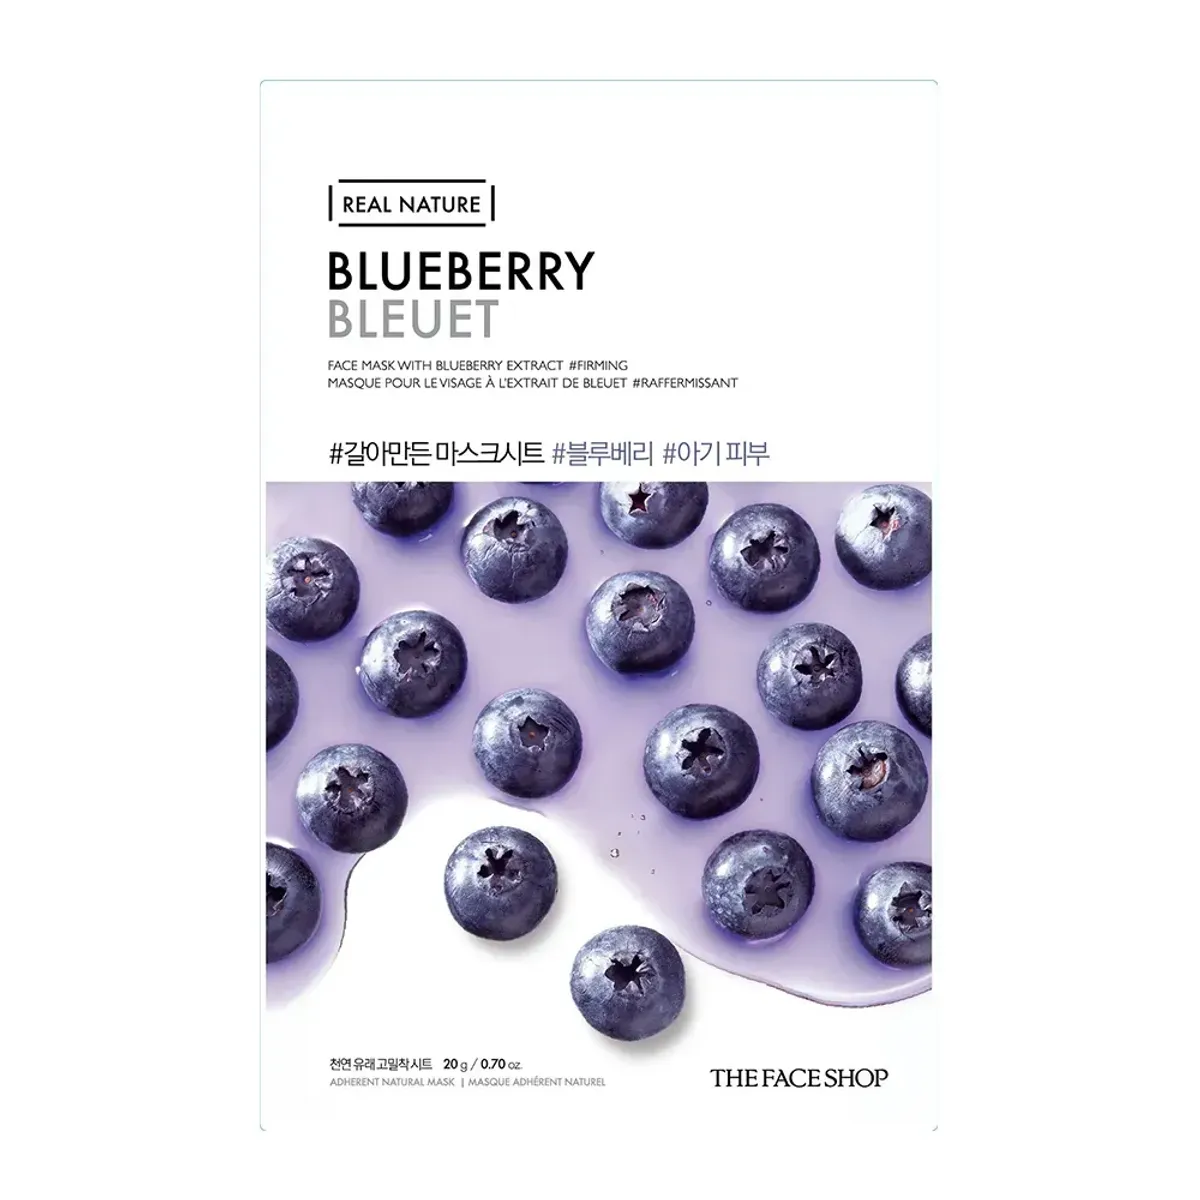 thefaceshop-real-nature-blueberry-face-mask-1